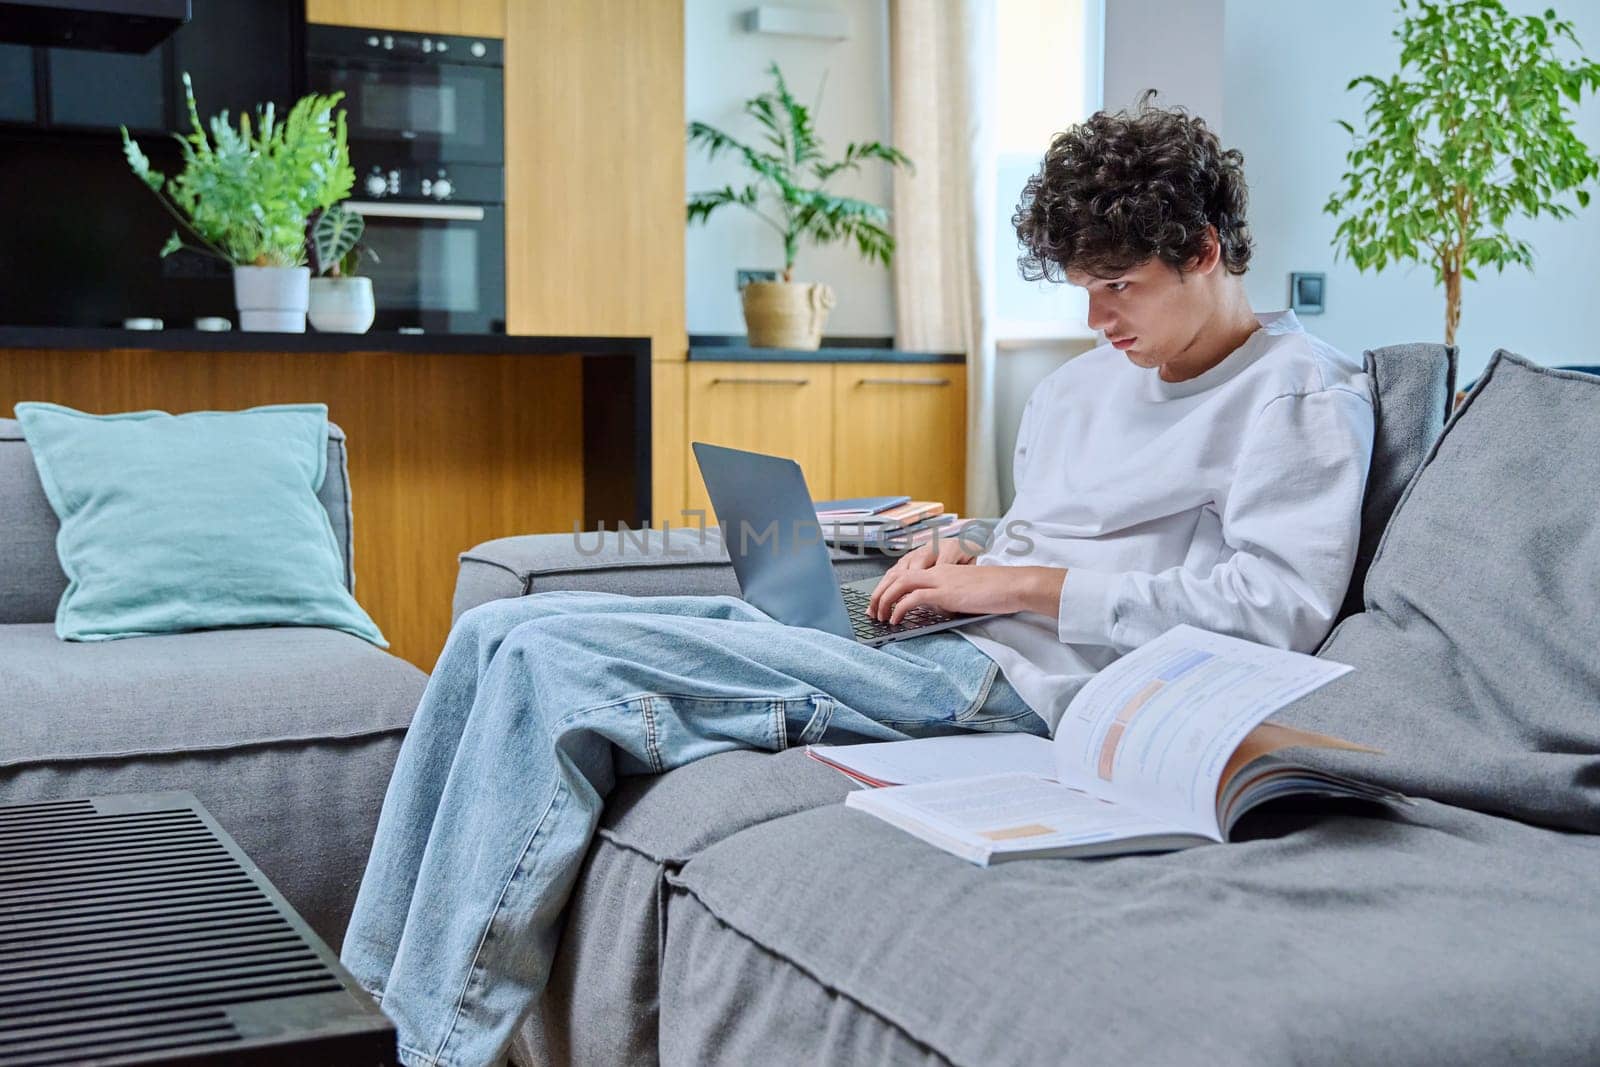 Handsome guy college student studying at home, sitting on sofa typing on laptop. Young male 18, 19 years old with curly hair in interior of living room. Education knowledge online internet technology